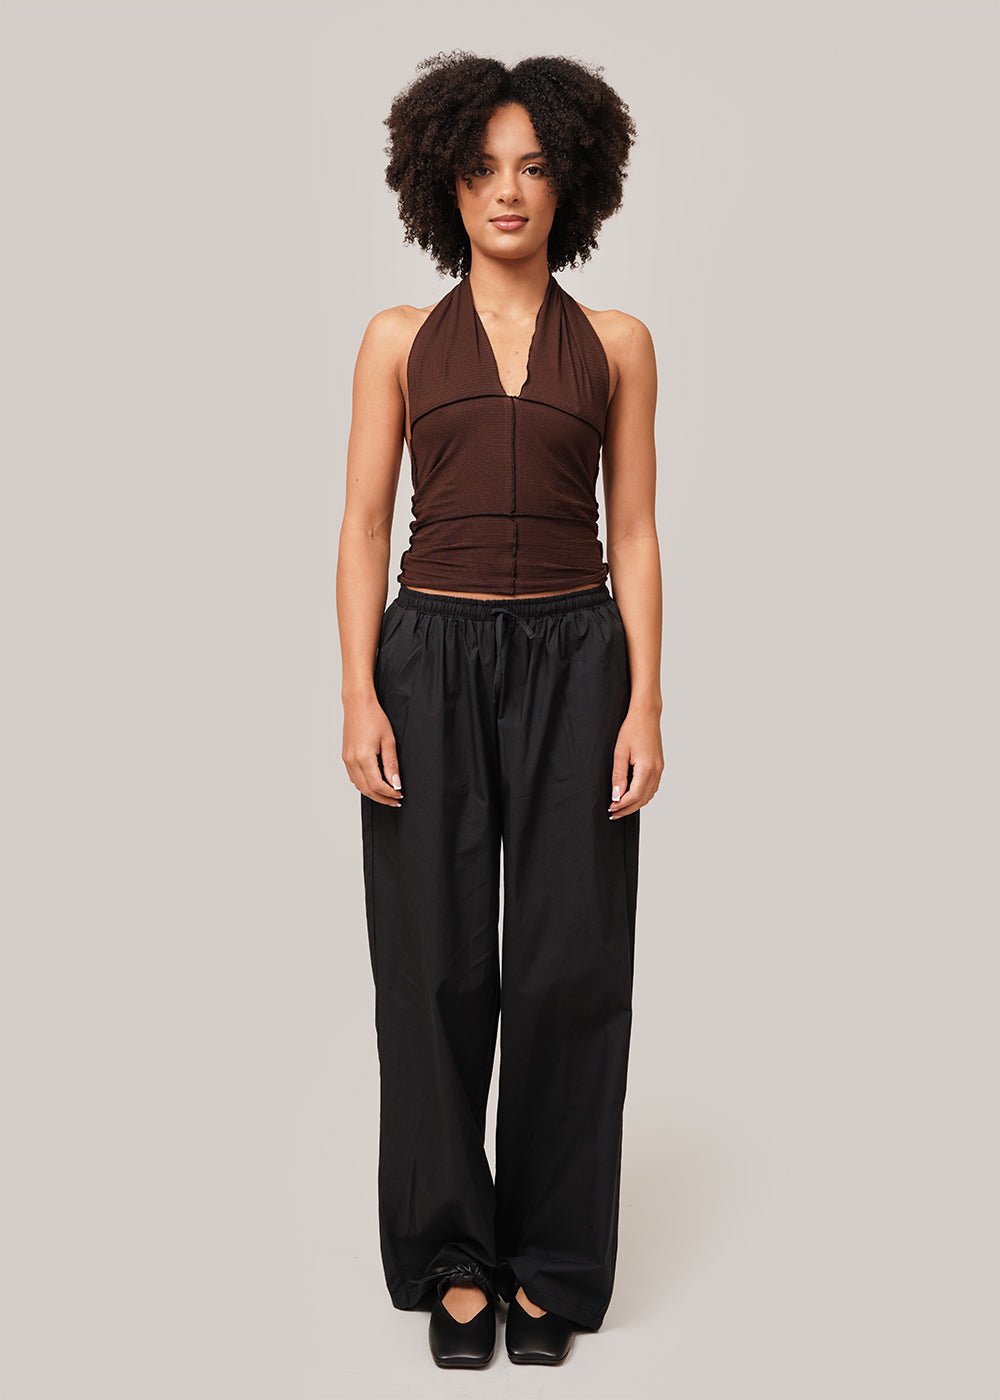 https://newclassics.ca/cdn/shop/products/baserange-cinder-halter-top-new-classics-studios-sustainable-and-ethical-fashion-canada-291541_1000x.jpg?v=1706051529